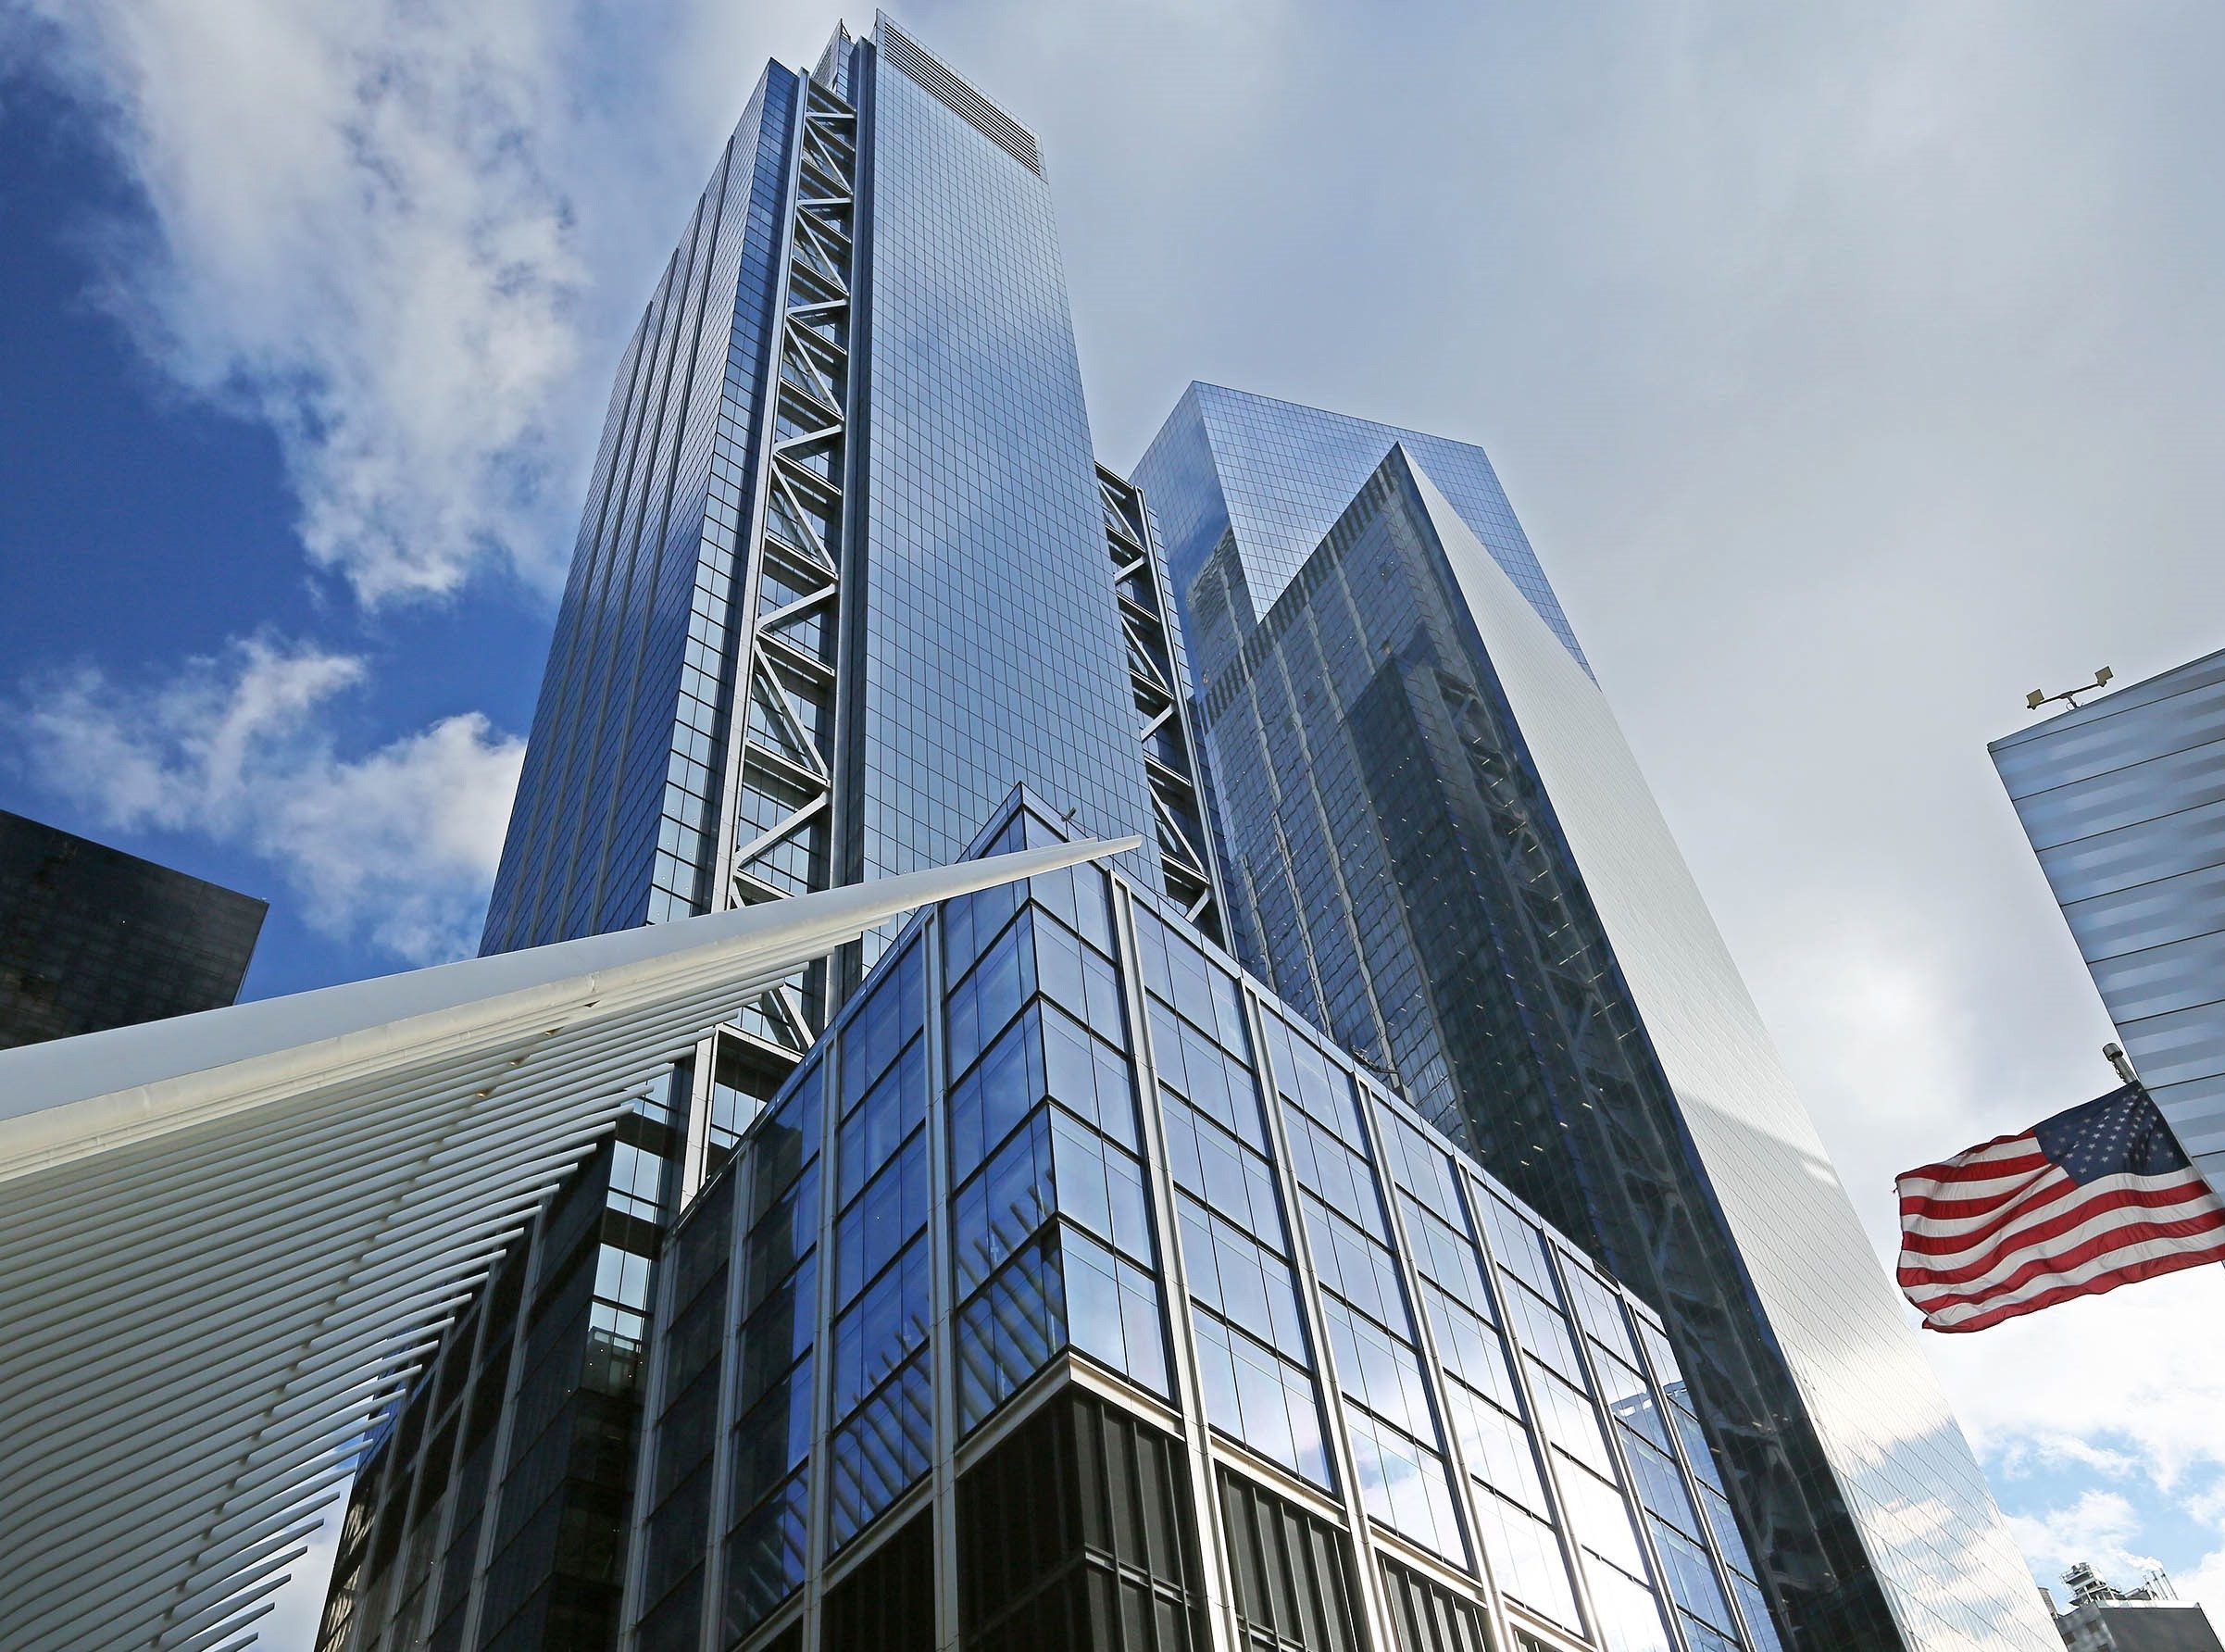 Law Firm Inks Lease at 3 World Trade Center - Commercial Property Executive